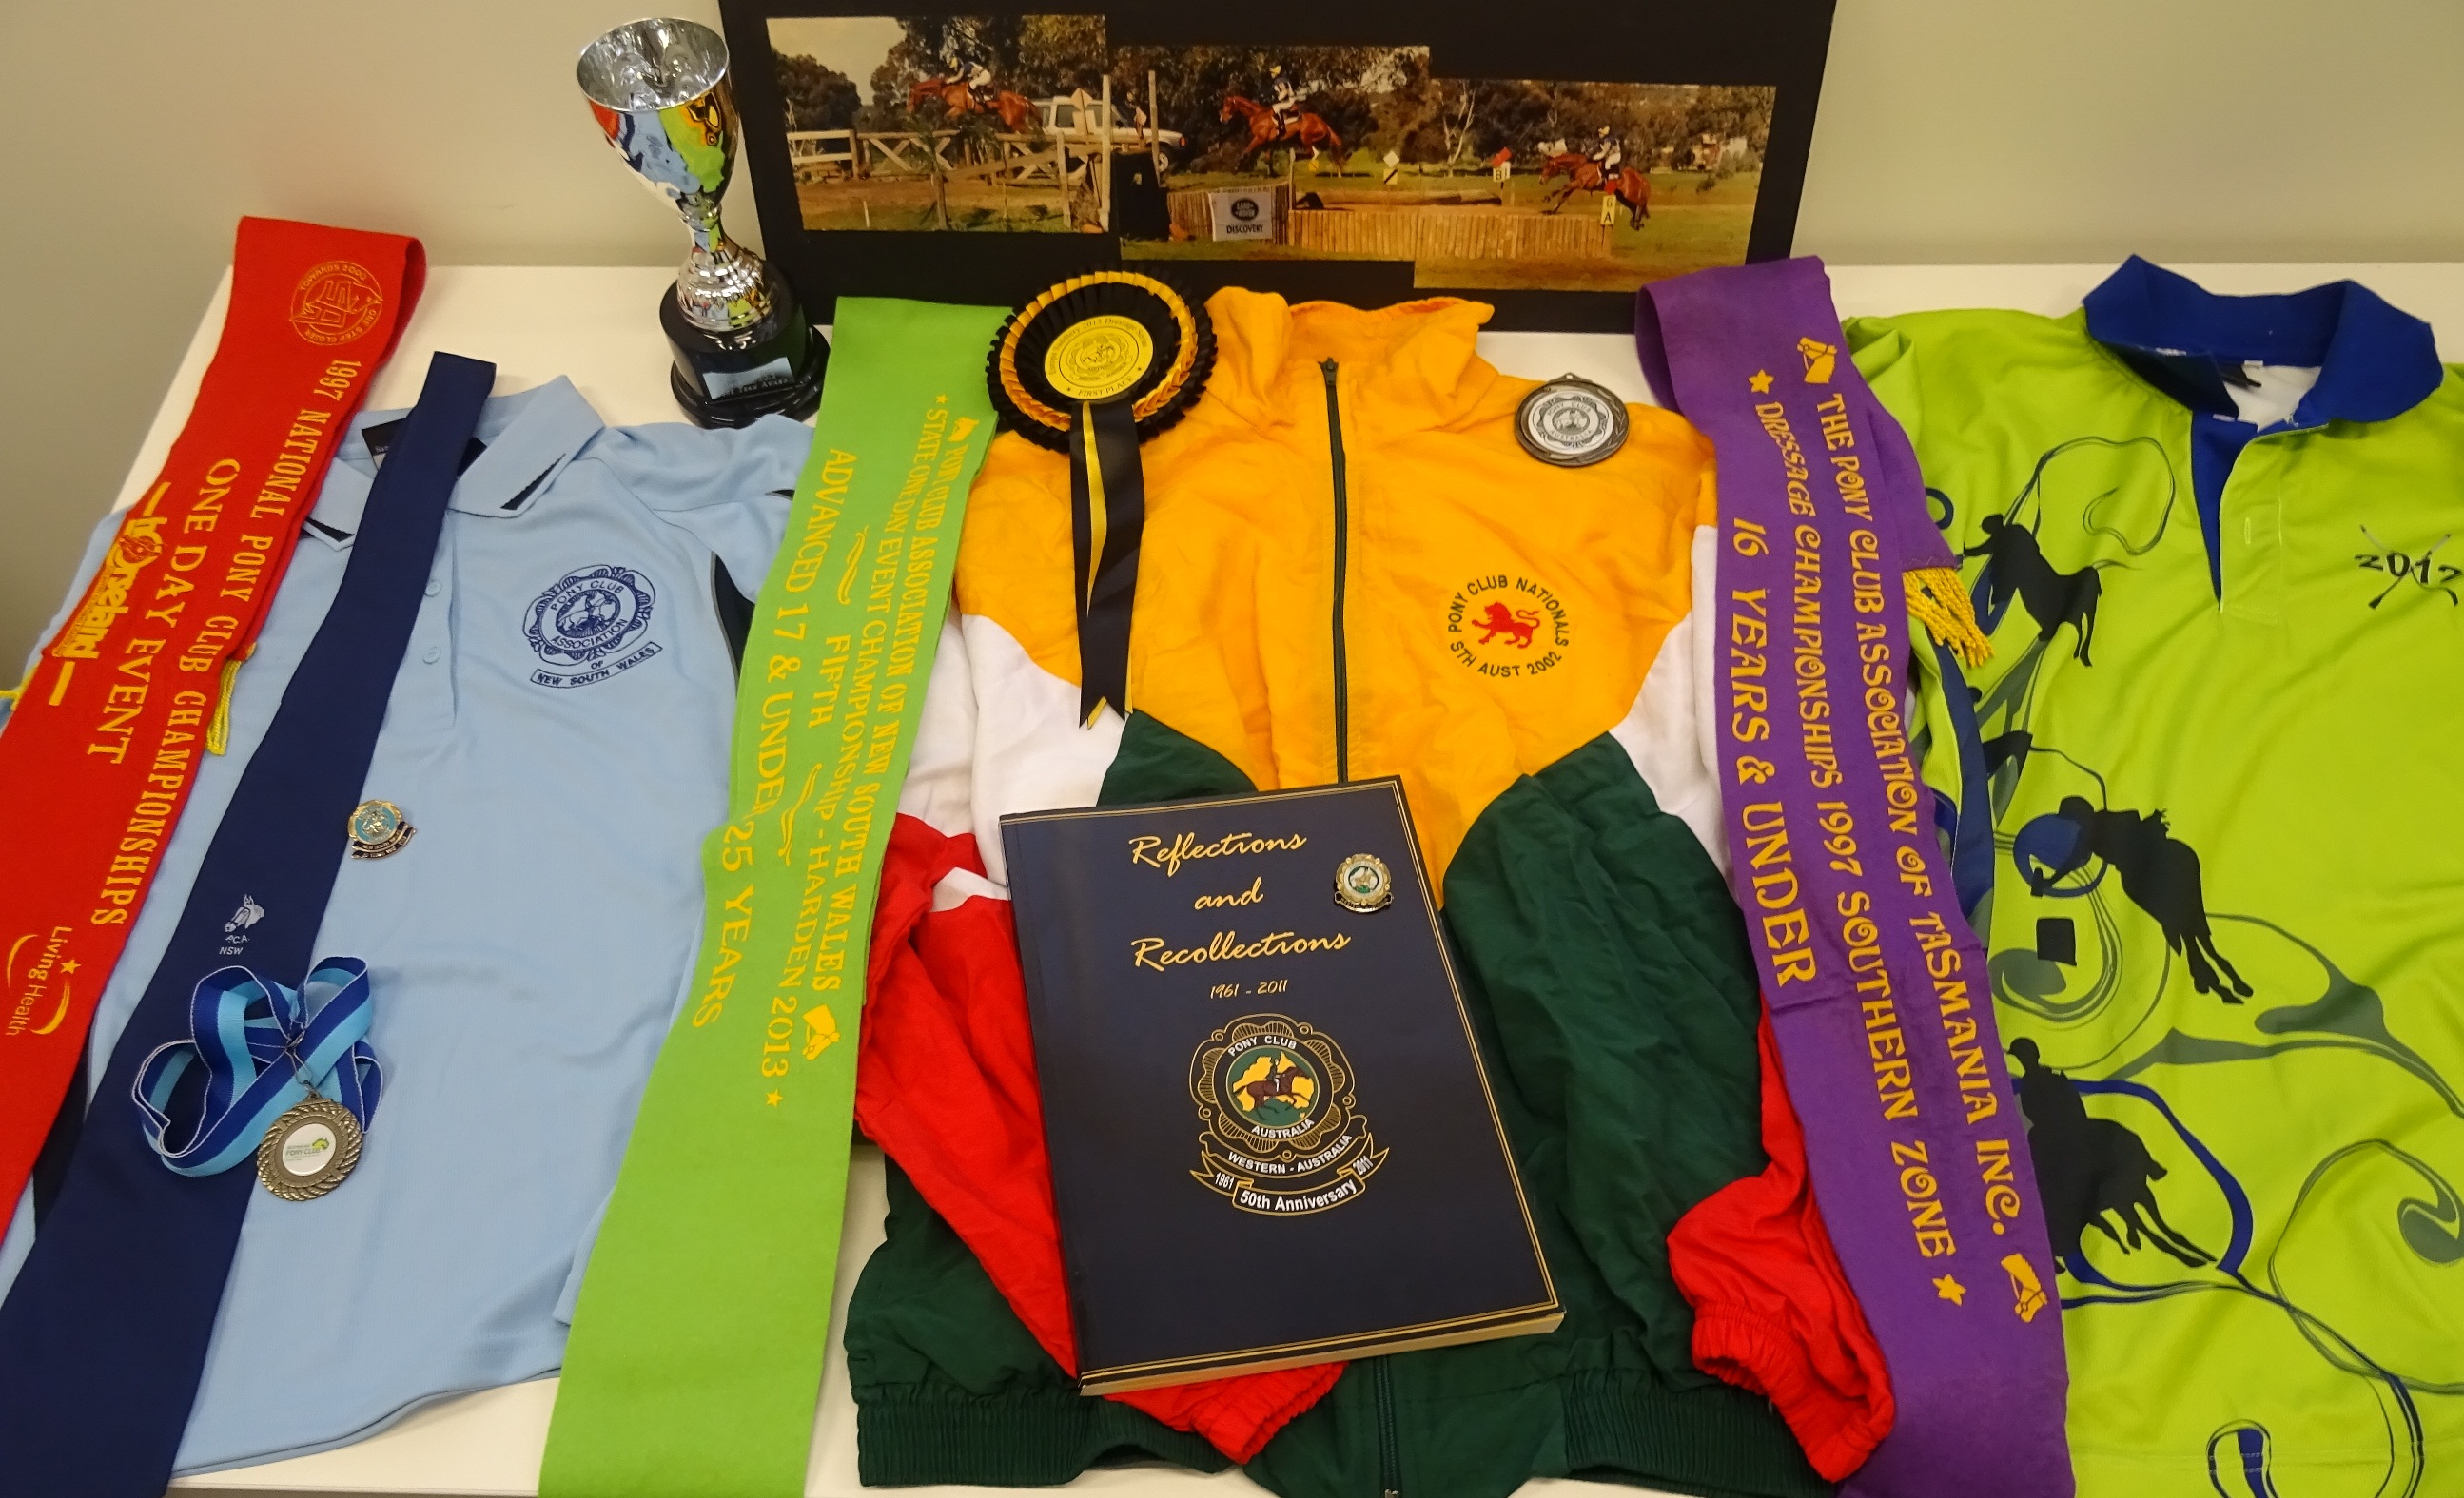 Material sent from the pony club associations of New South Wales, Tasmania, Western Australia and Queensland